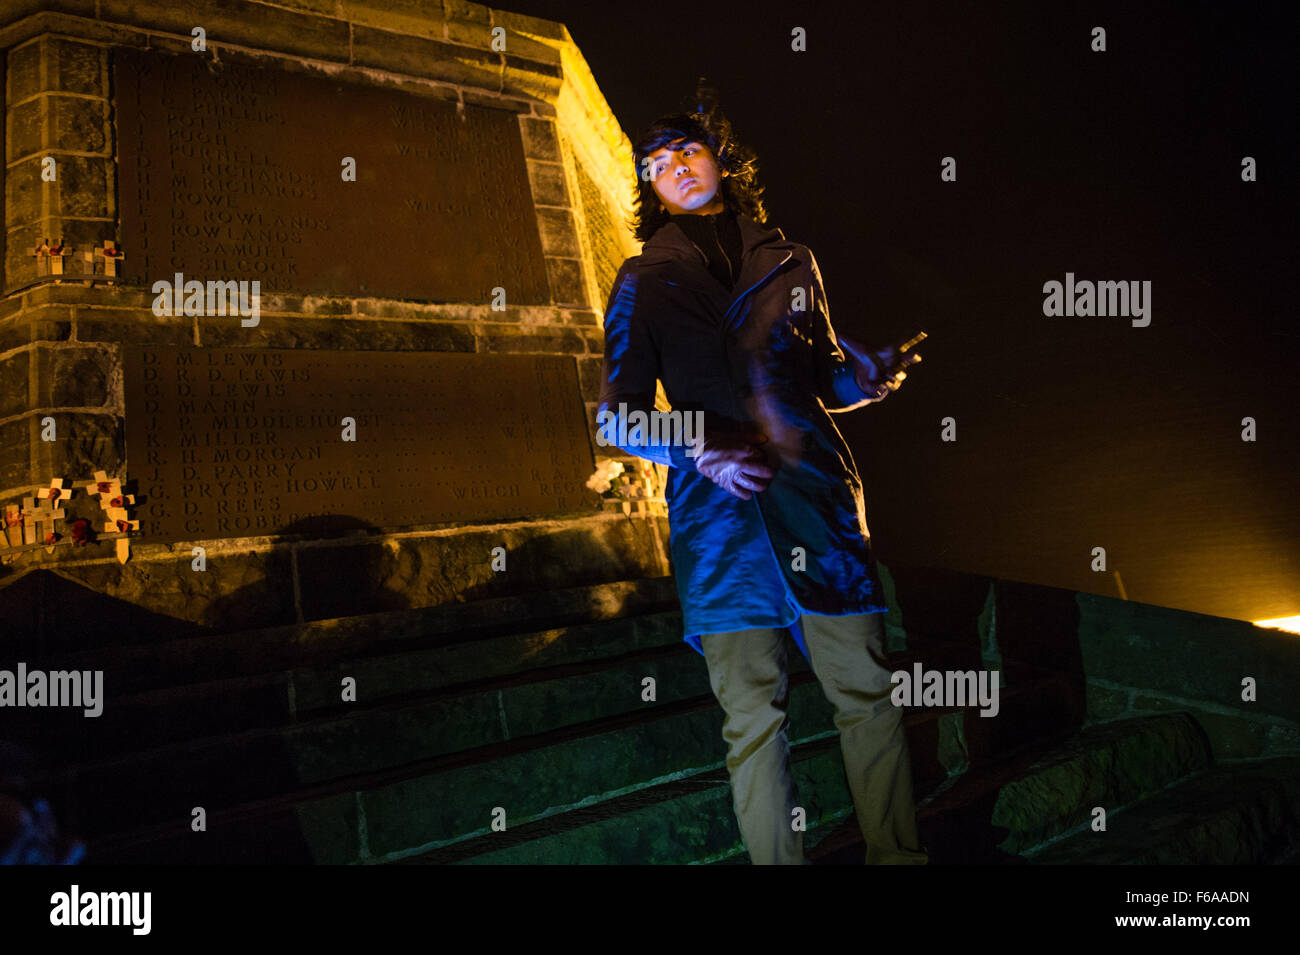 Aberystwyth, Wales, UK. 15 Nov, 2015.   Aberystwyth university student ADI PUTERA  speaking at an emotional candle-lit vigil on the steps of the town’s iconic war memorial,  in memory of all those killed in the Paris terrorist attacks of November 13 2015    photo Credit:  Keith Morris / Alamy Live News Stock Photo